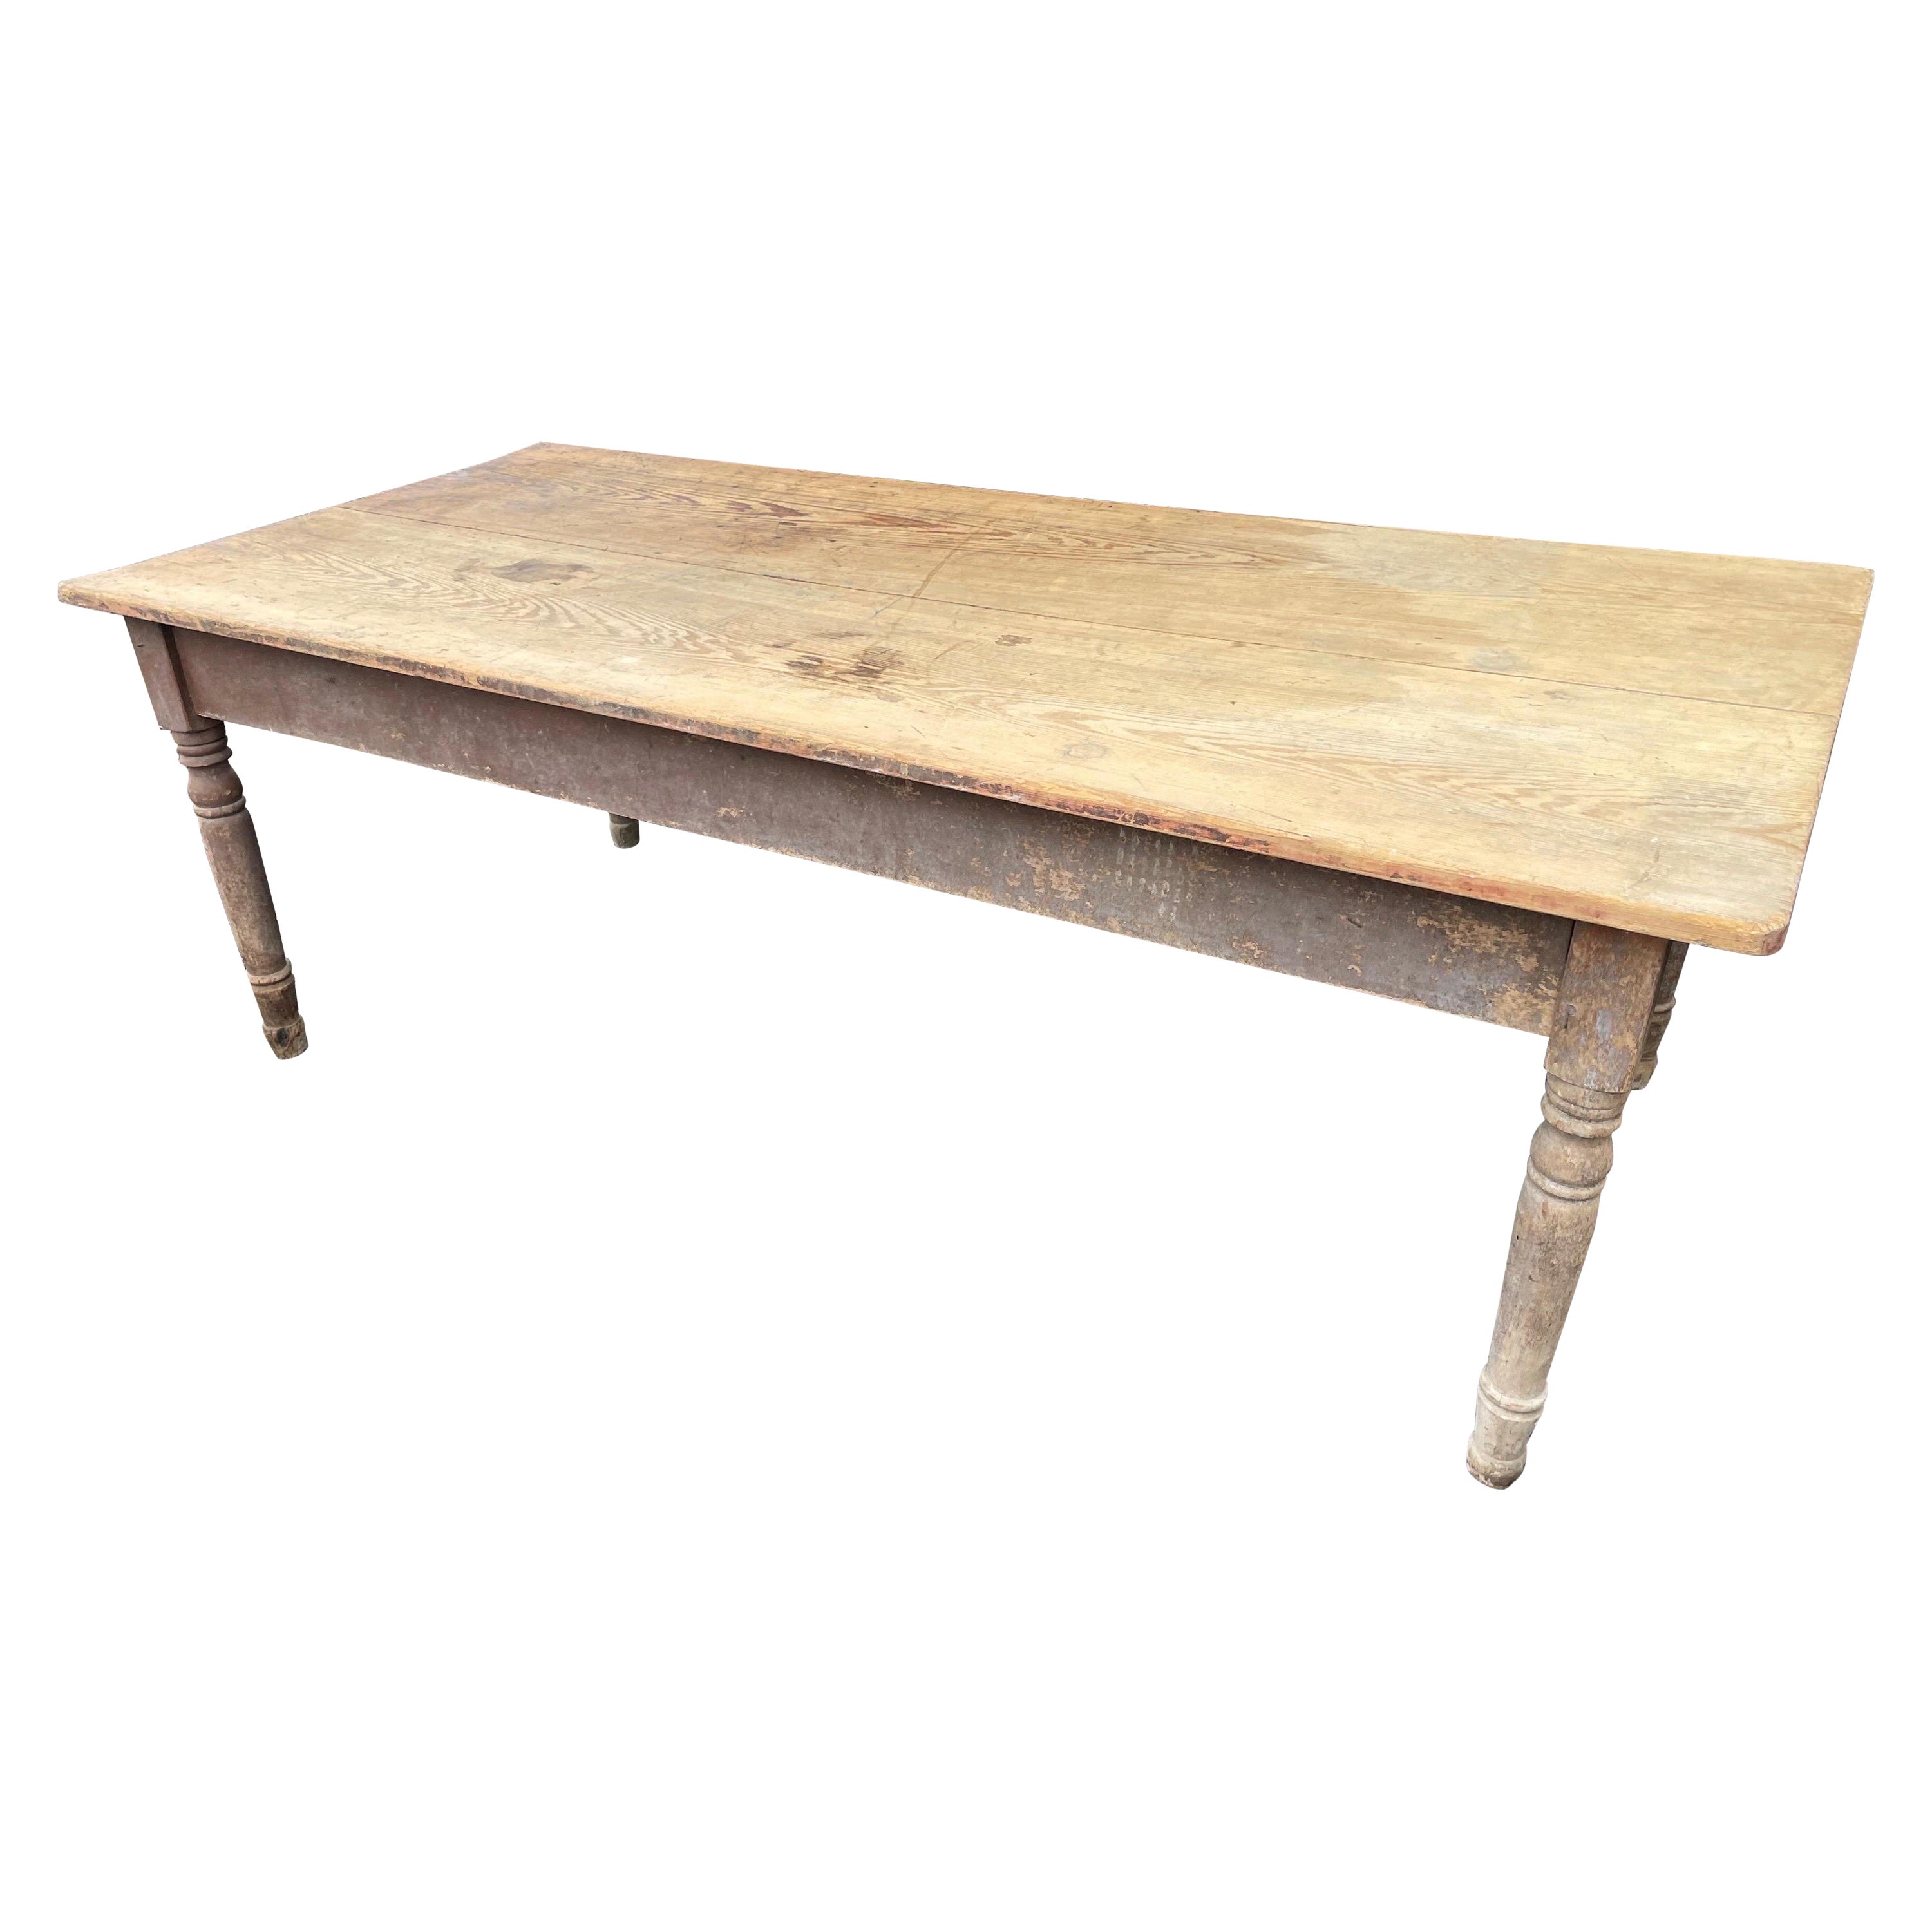 Antique Rustic Turned Leg Extra Wide Plank Top Pine Farm Table For Sale